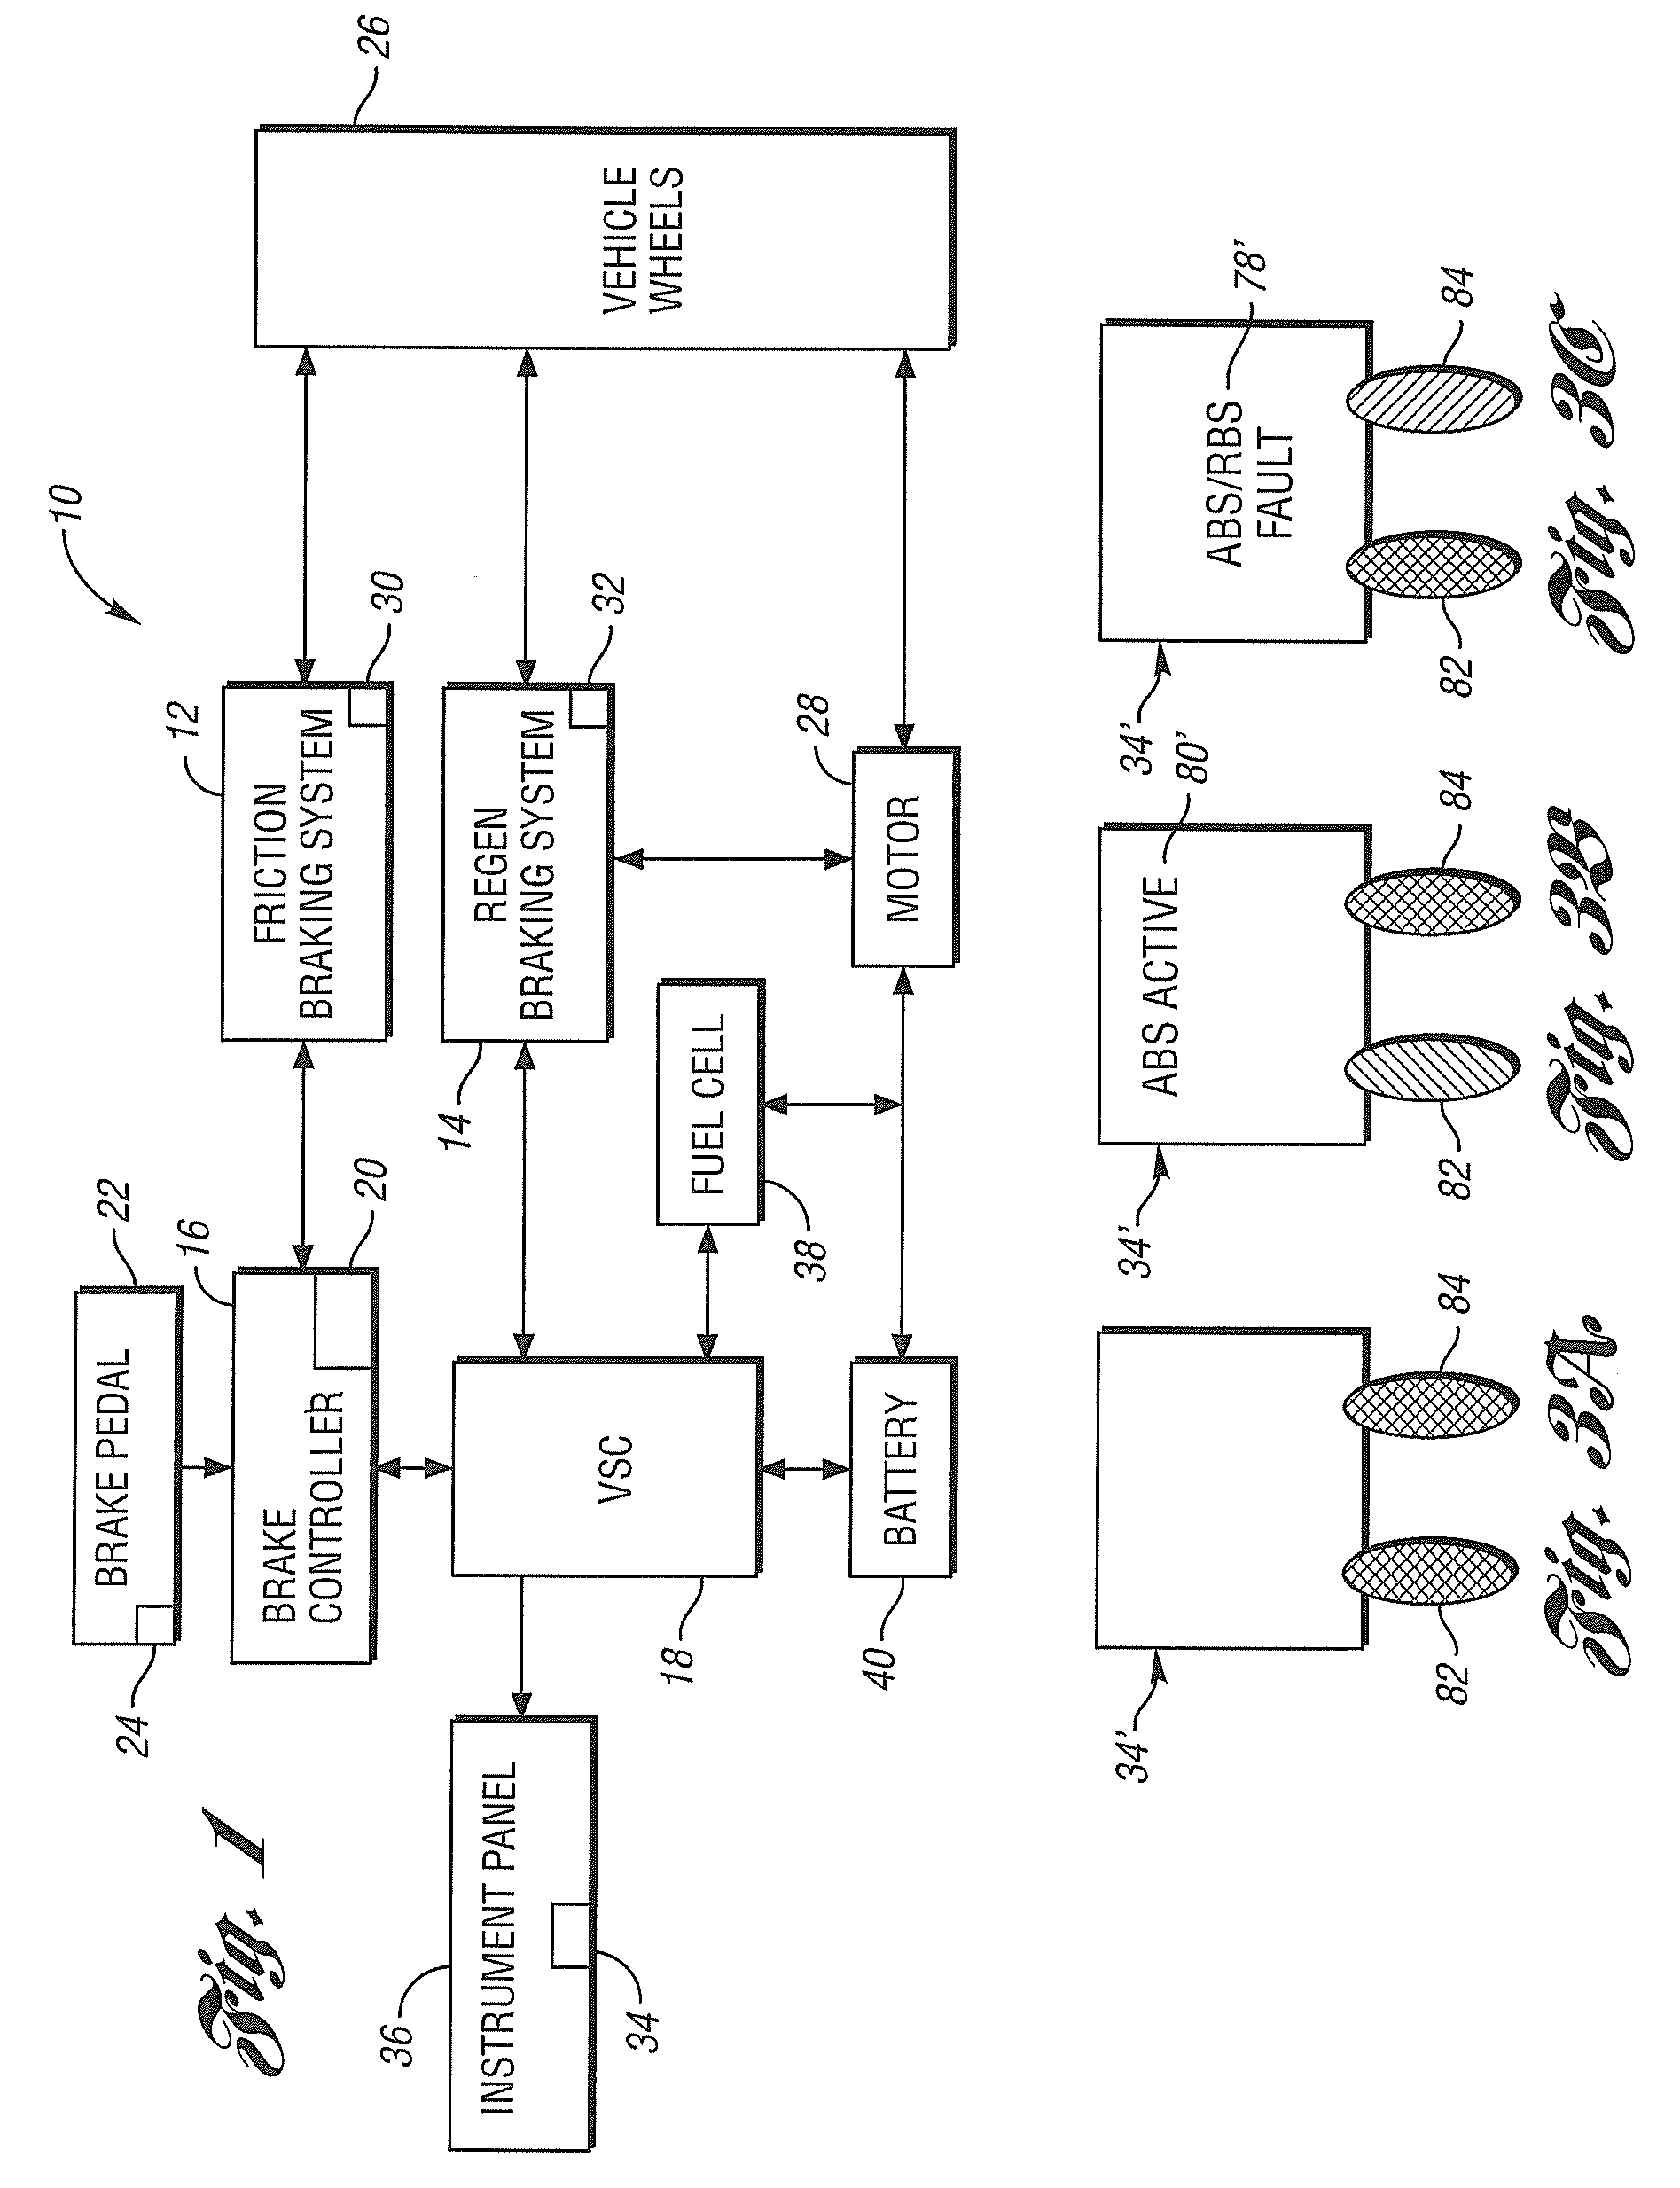 Vehicle and method for controlling brake system indicators